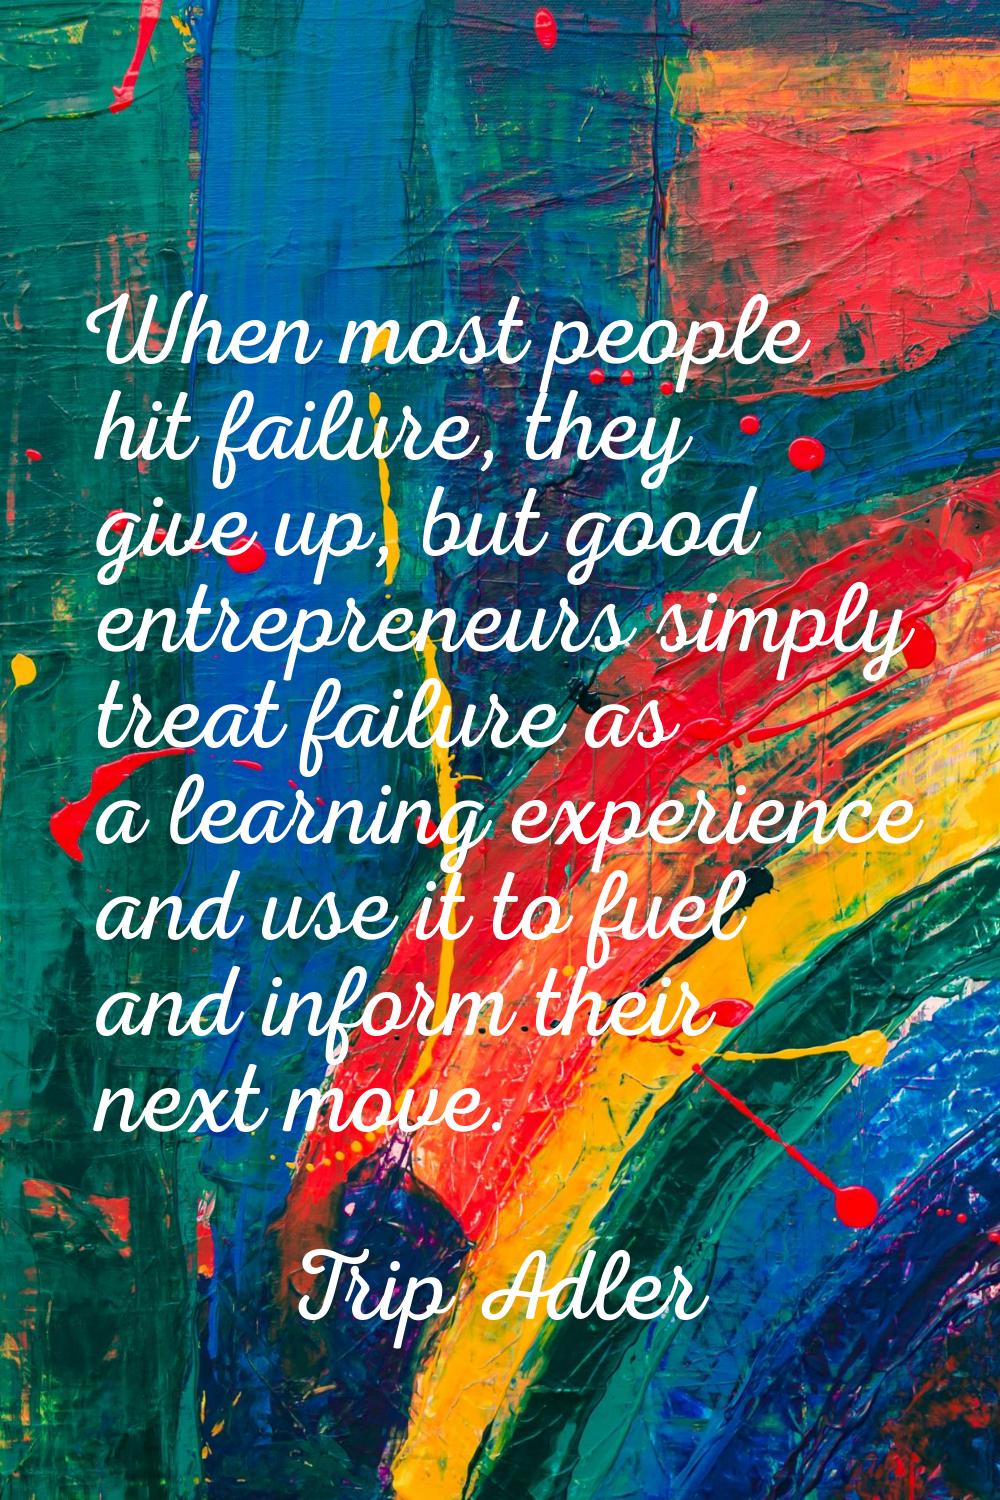 When most people hit failure, they give up, but good entrepreneurs simply treat failure as a learni